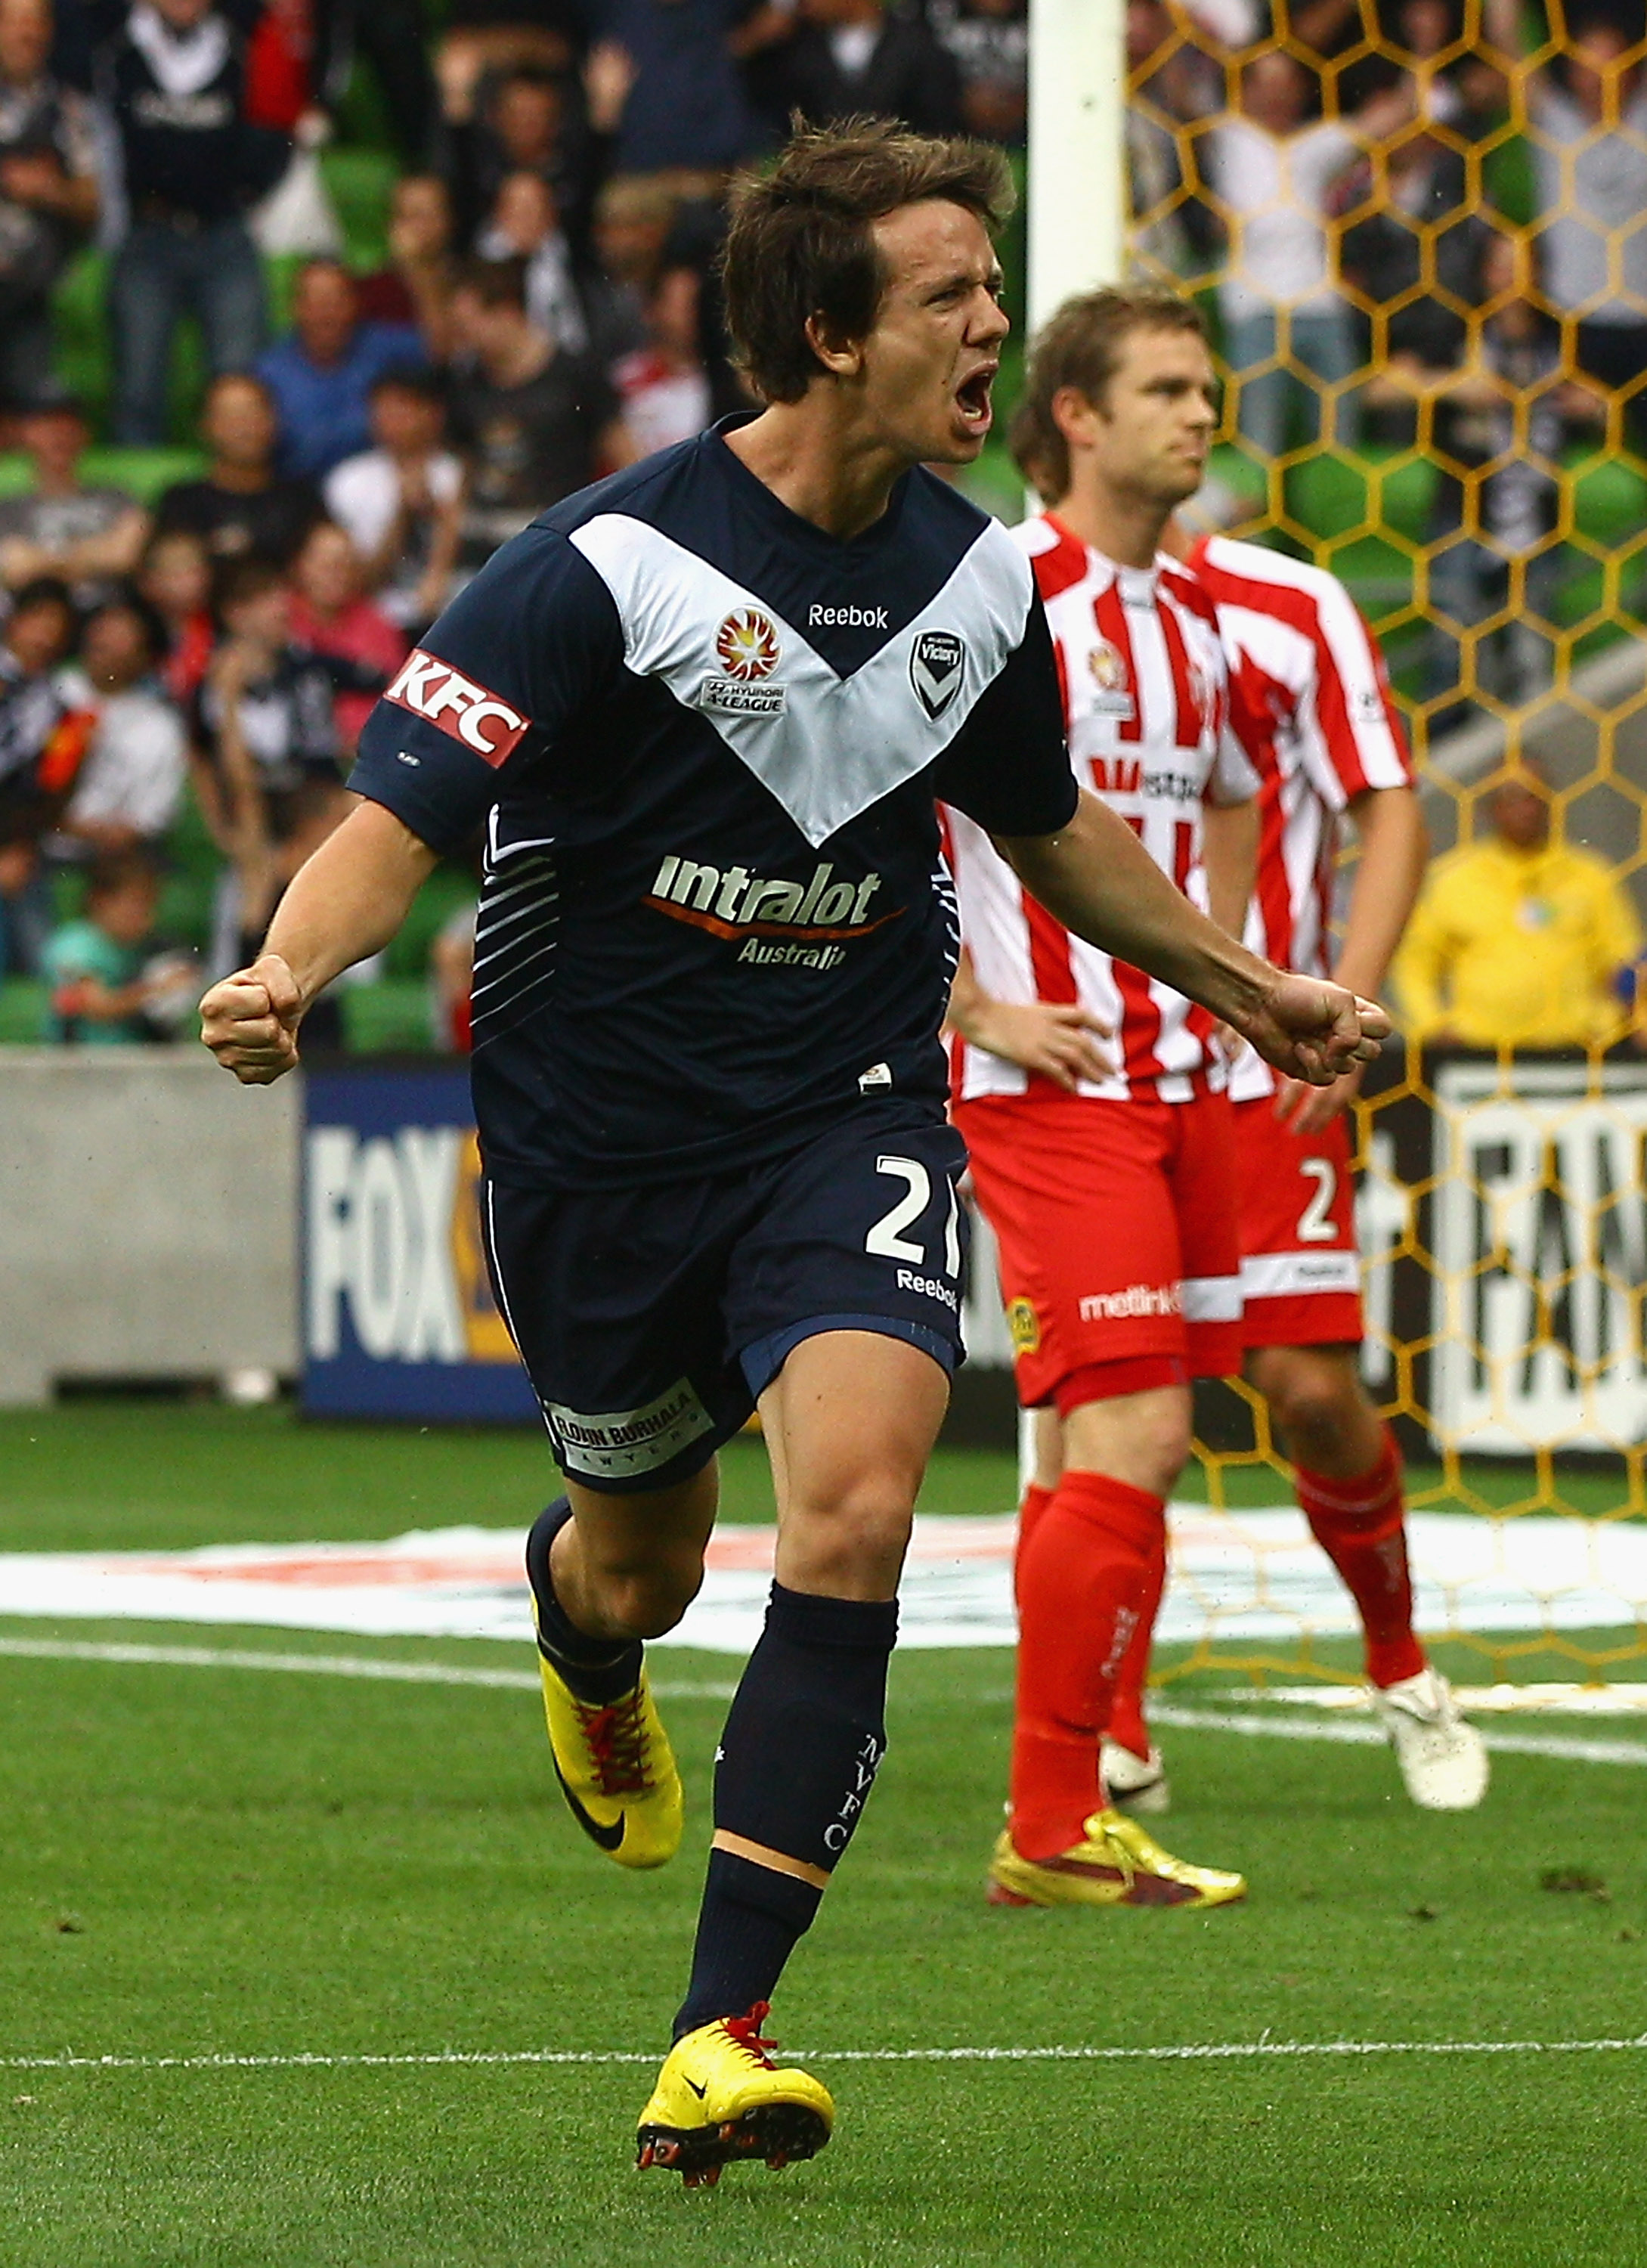 MELBOURNE, AUSTRALIA - DECEMBER 11:  Robbie Kruse of the Victory celebrates scoring a goal during the round 18 A-League match between the Melbourne Heart and Melbourne Victory at AAMI Park  on December 11, 2010 in Melbourne, Australia.  (Photo by Quinn Ro